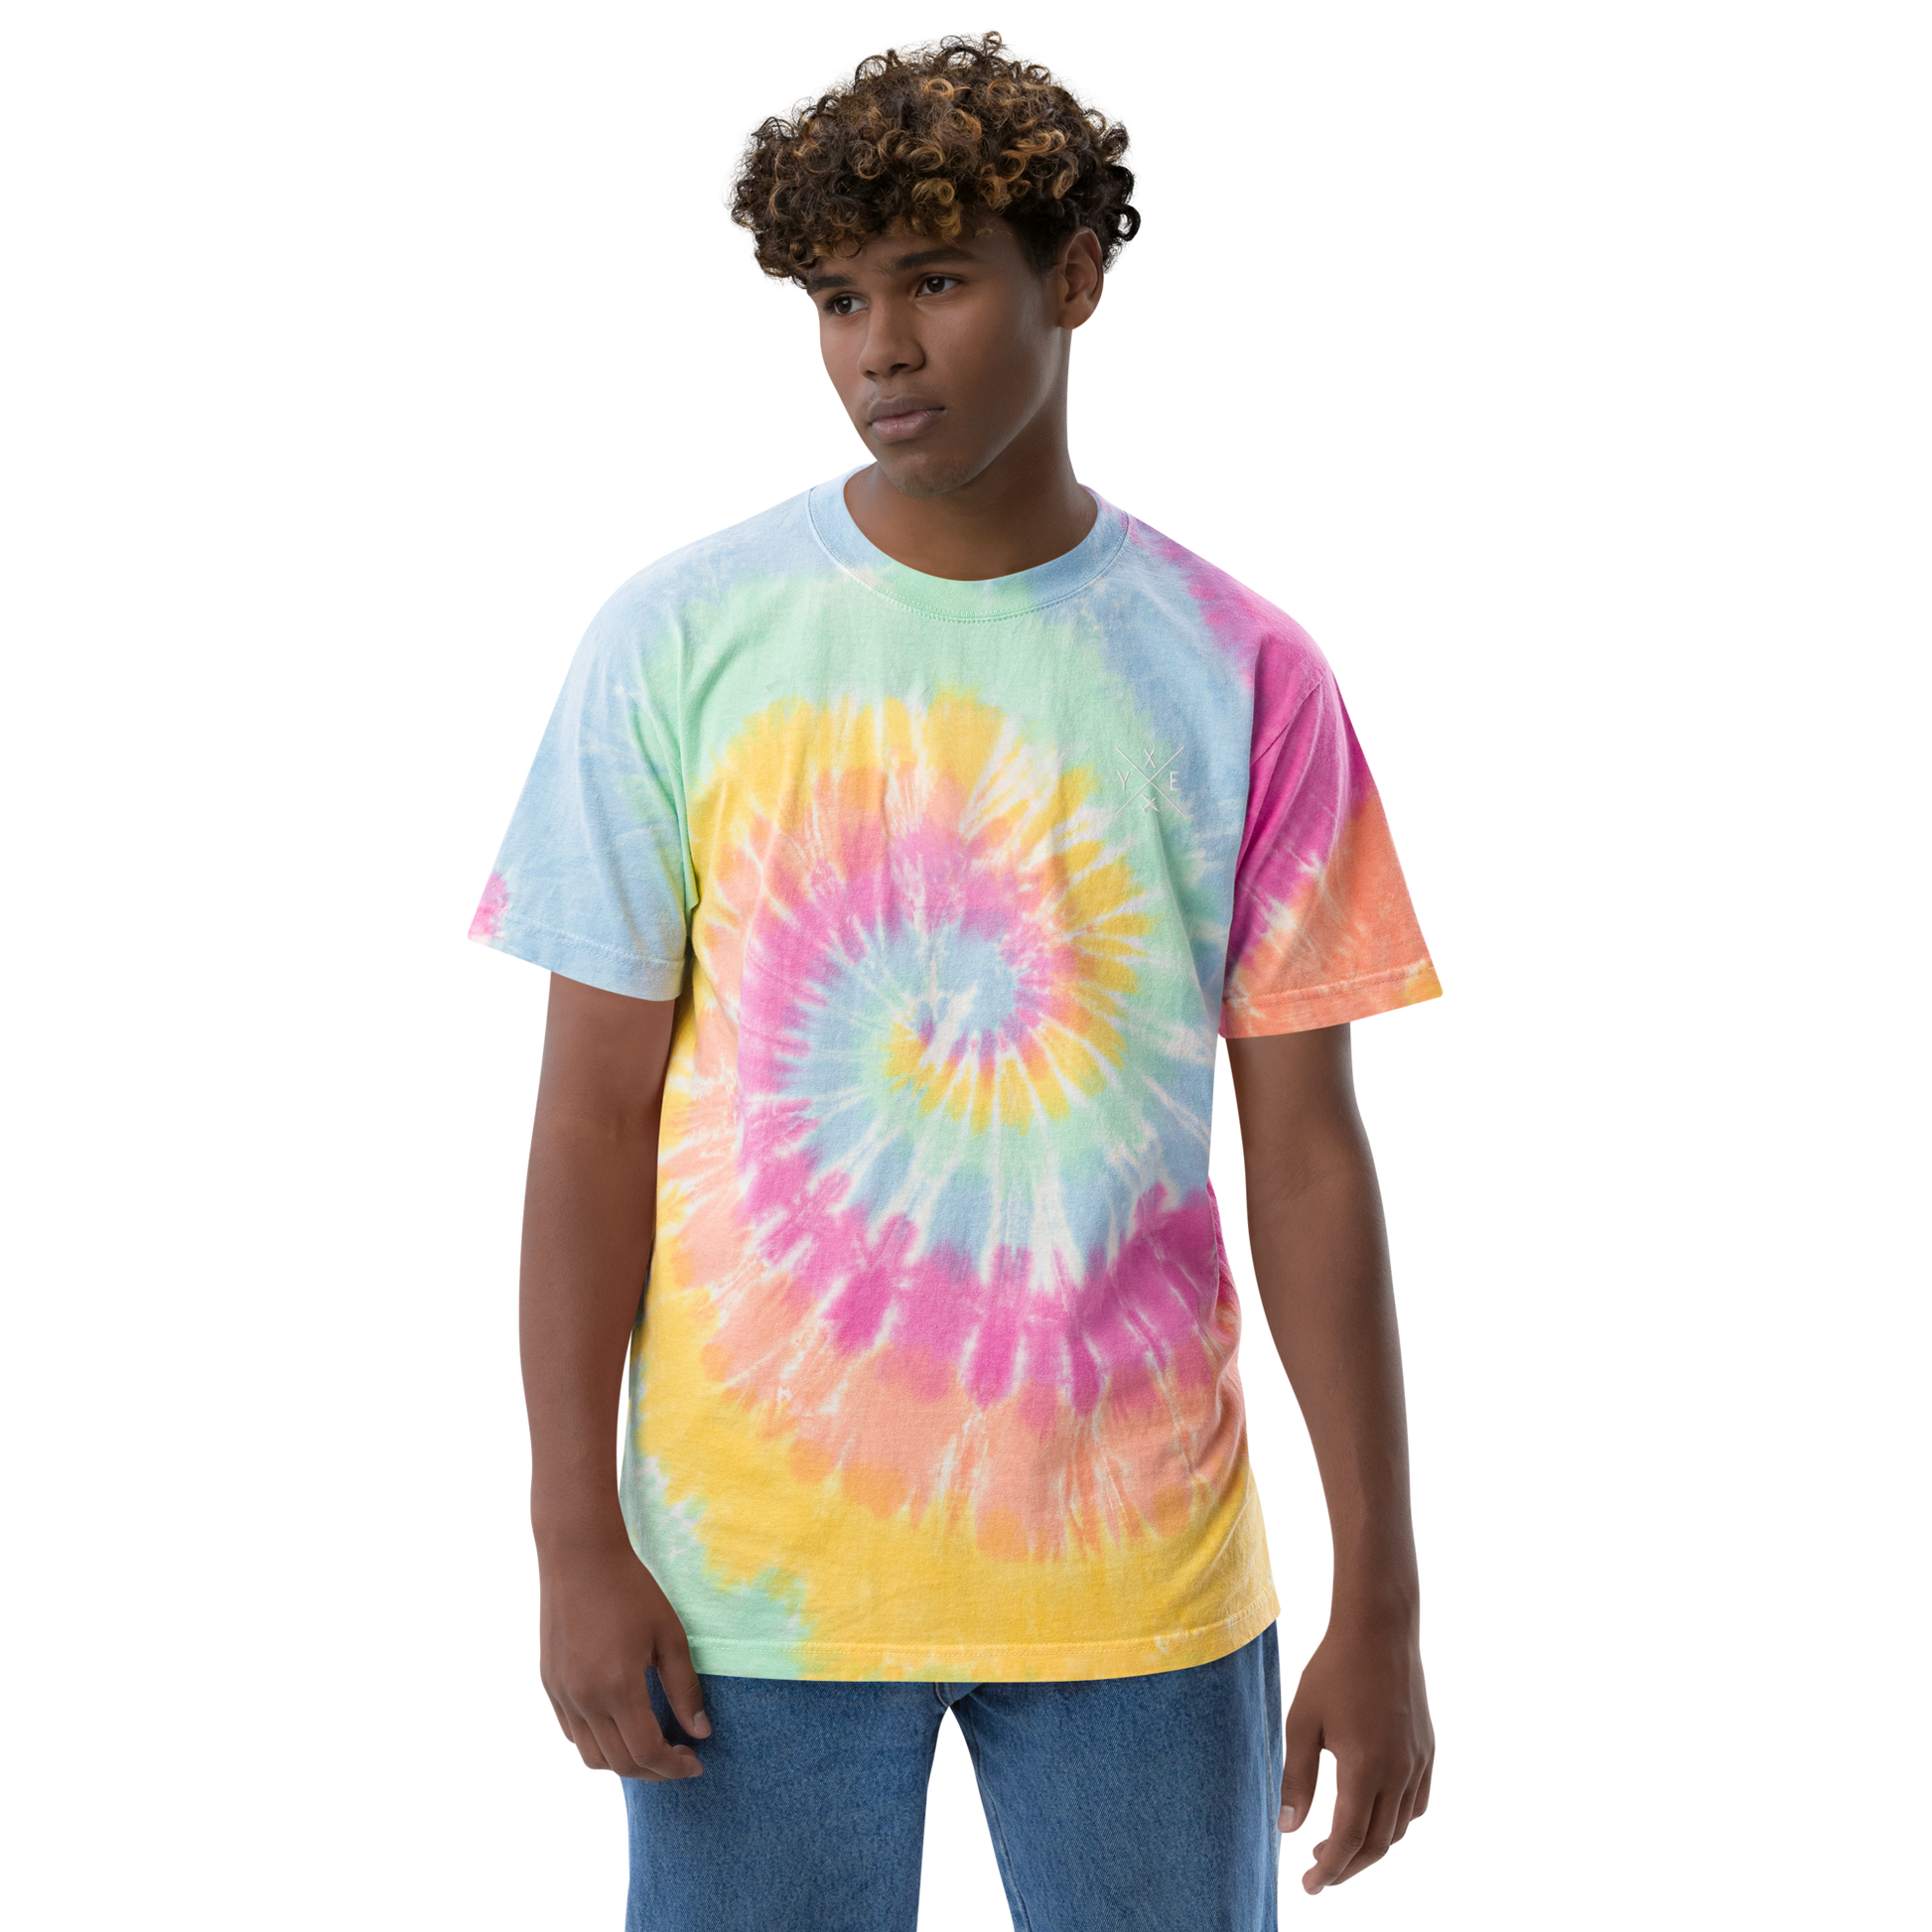 YHM Designs - YXE Saskatoon Oversized Tie-Dye T-Shirt - Crossed-X Design with Airport Code and Vintage Propliner - White Embroidery - Image 04